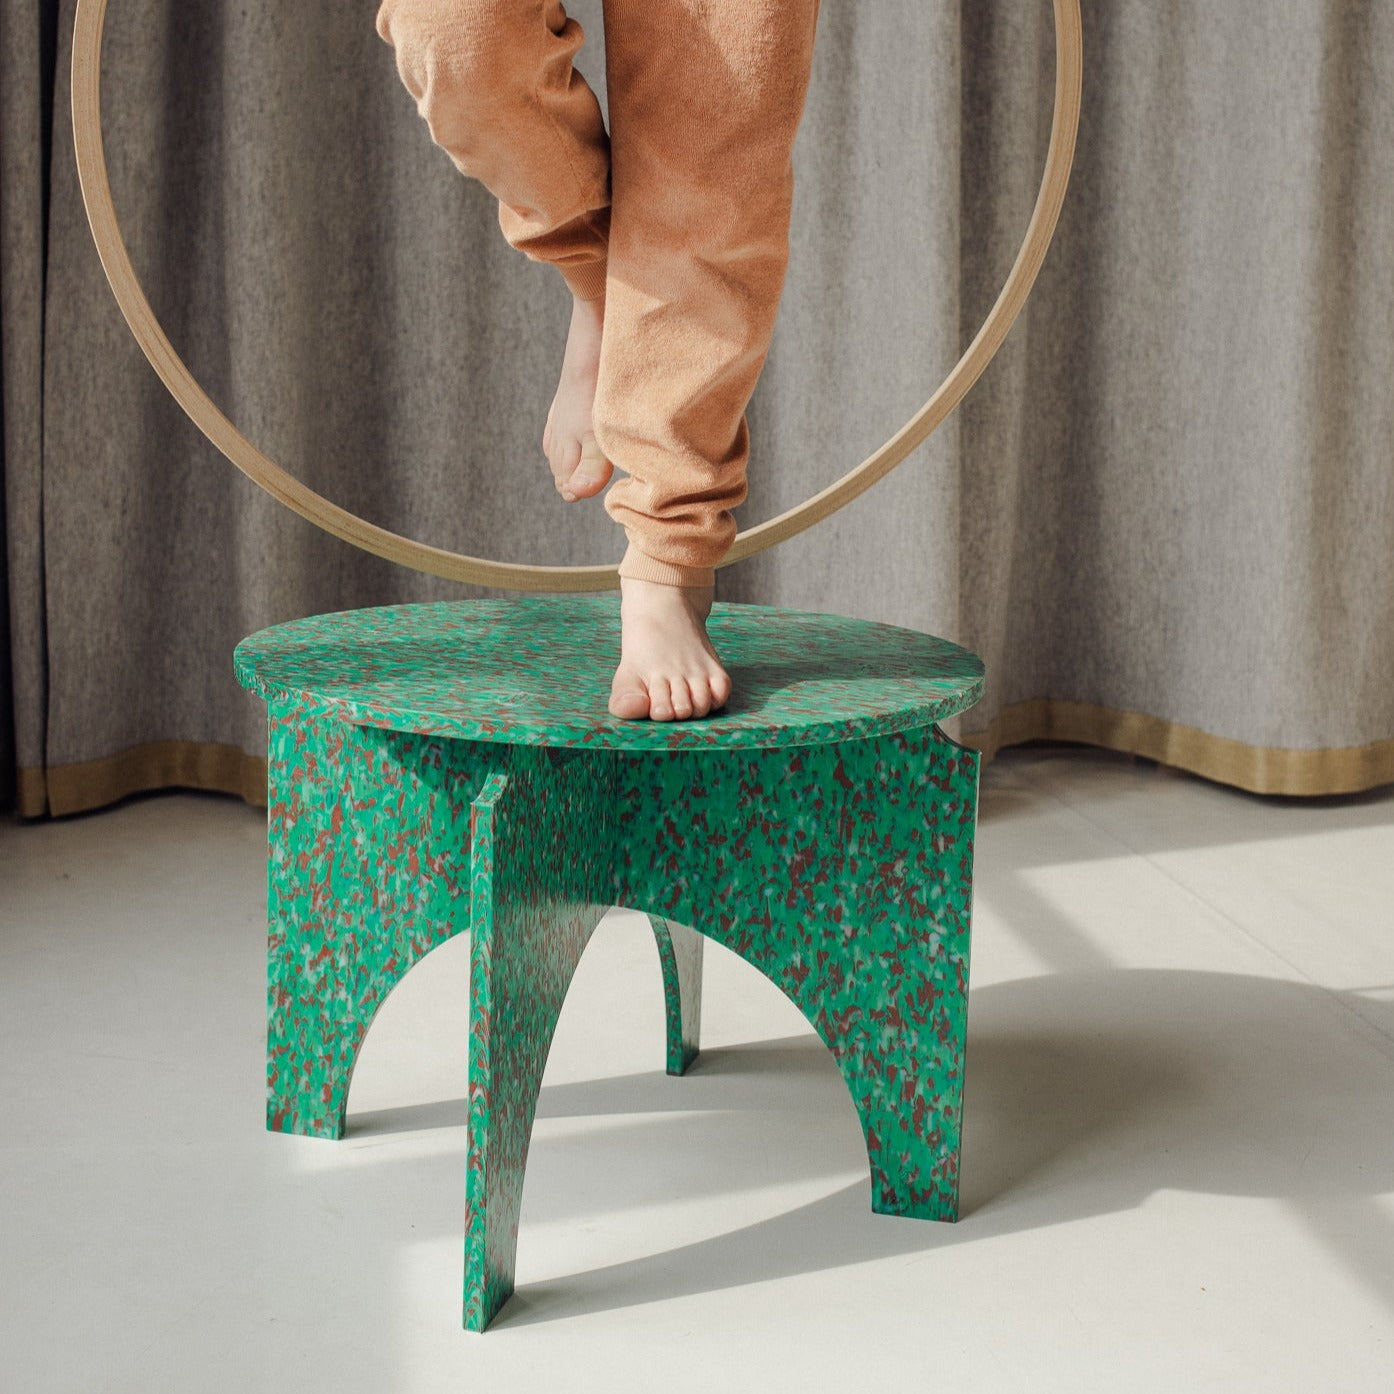 KID ON TOP OF GREEN TABLE BY THE MINIMONO PROJECT - BRAND FOR ECO FRIENDLY - PLAYFUL - MULTI FUNCTIONAL - SUSTAINABLE - HIGH QUALITY - DESIGN FURNITURE FROM RECYCLED PLASTIC FOR BOTH ADULT AND CHILDREN MADE IN BERLIN GERMANY